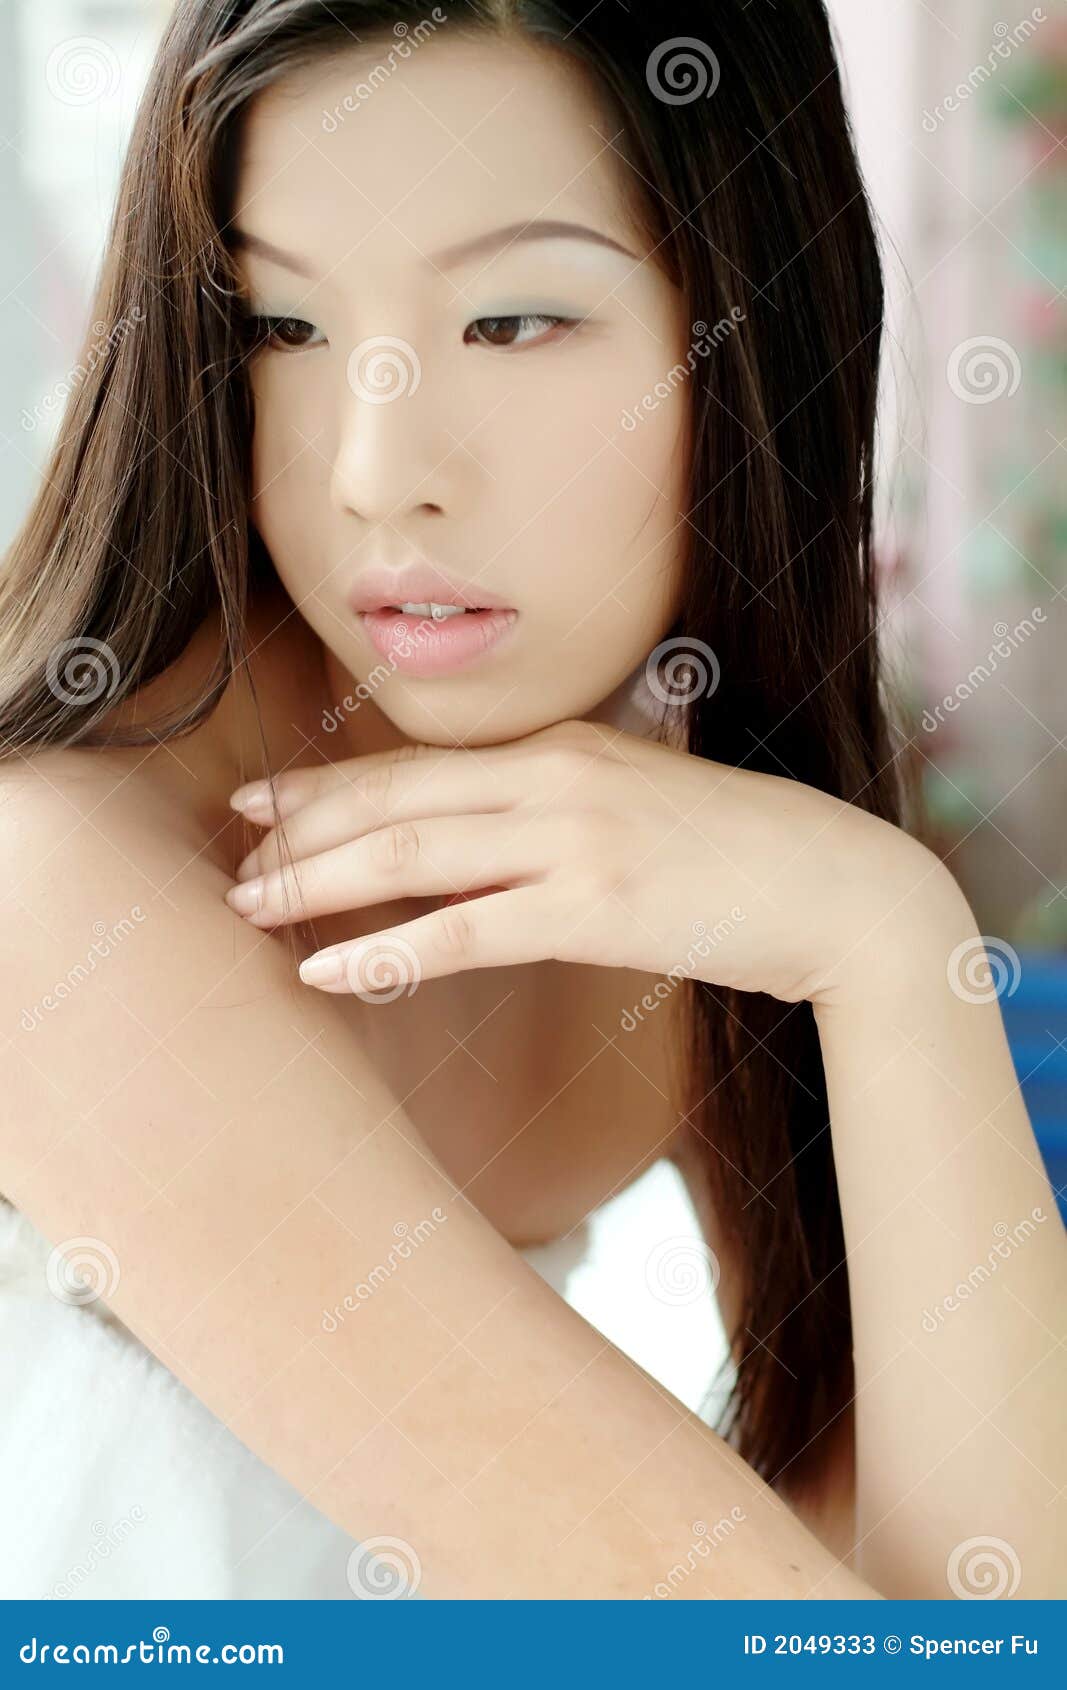 Cute Asian Girl In A Towel Stock Image Image Of Teen